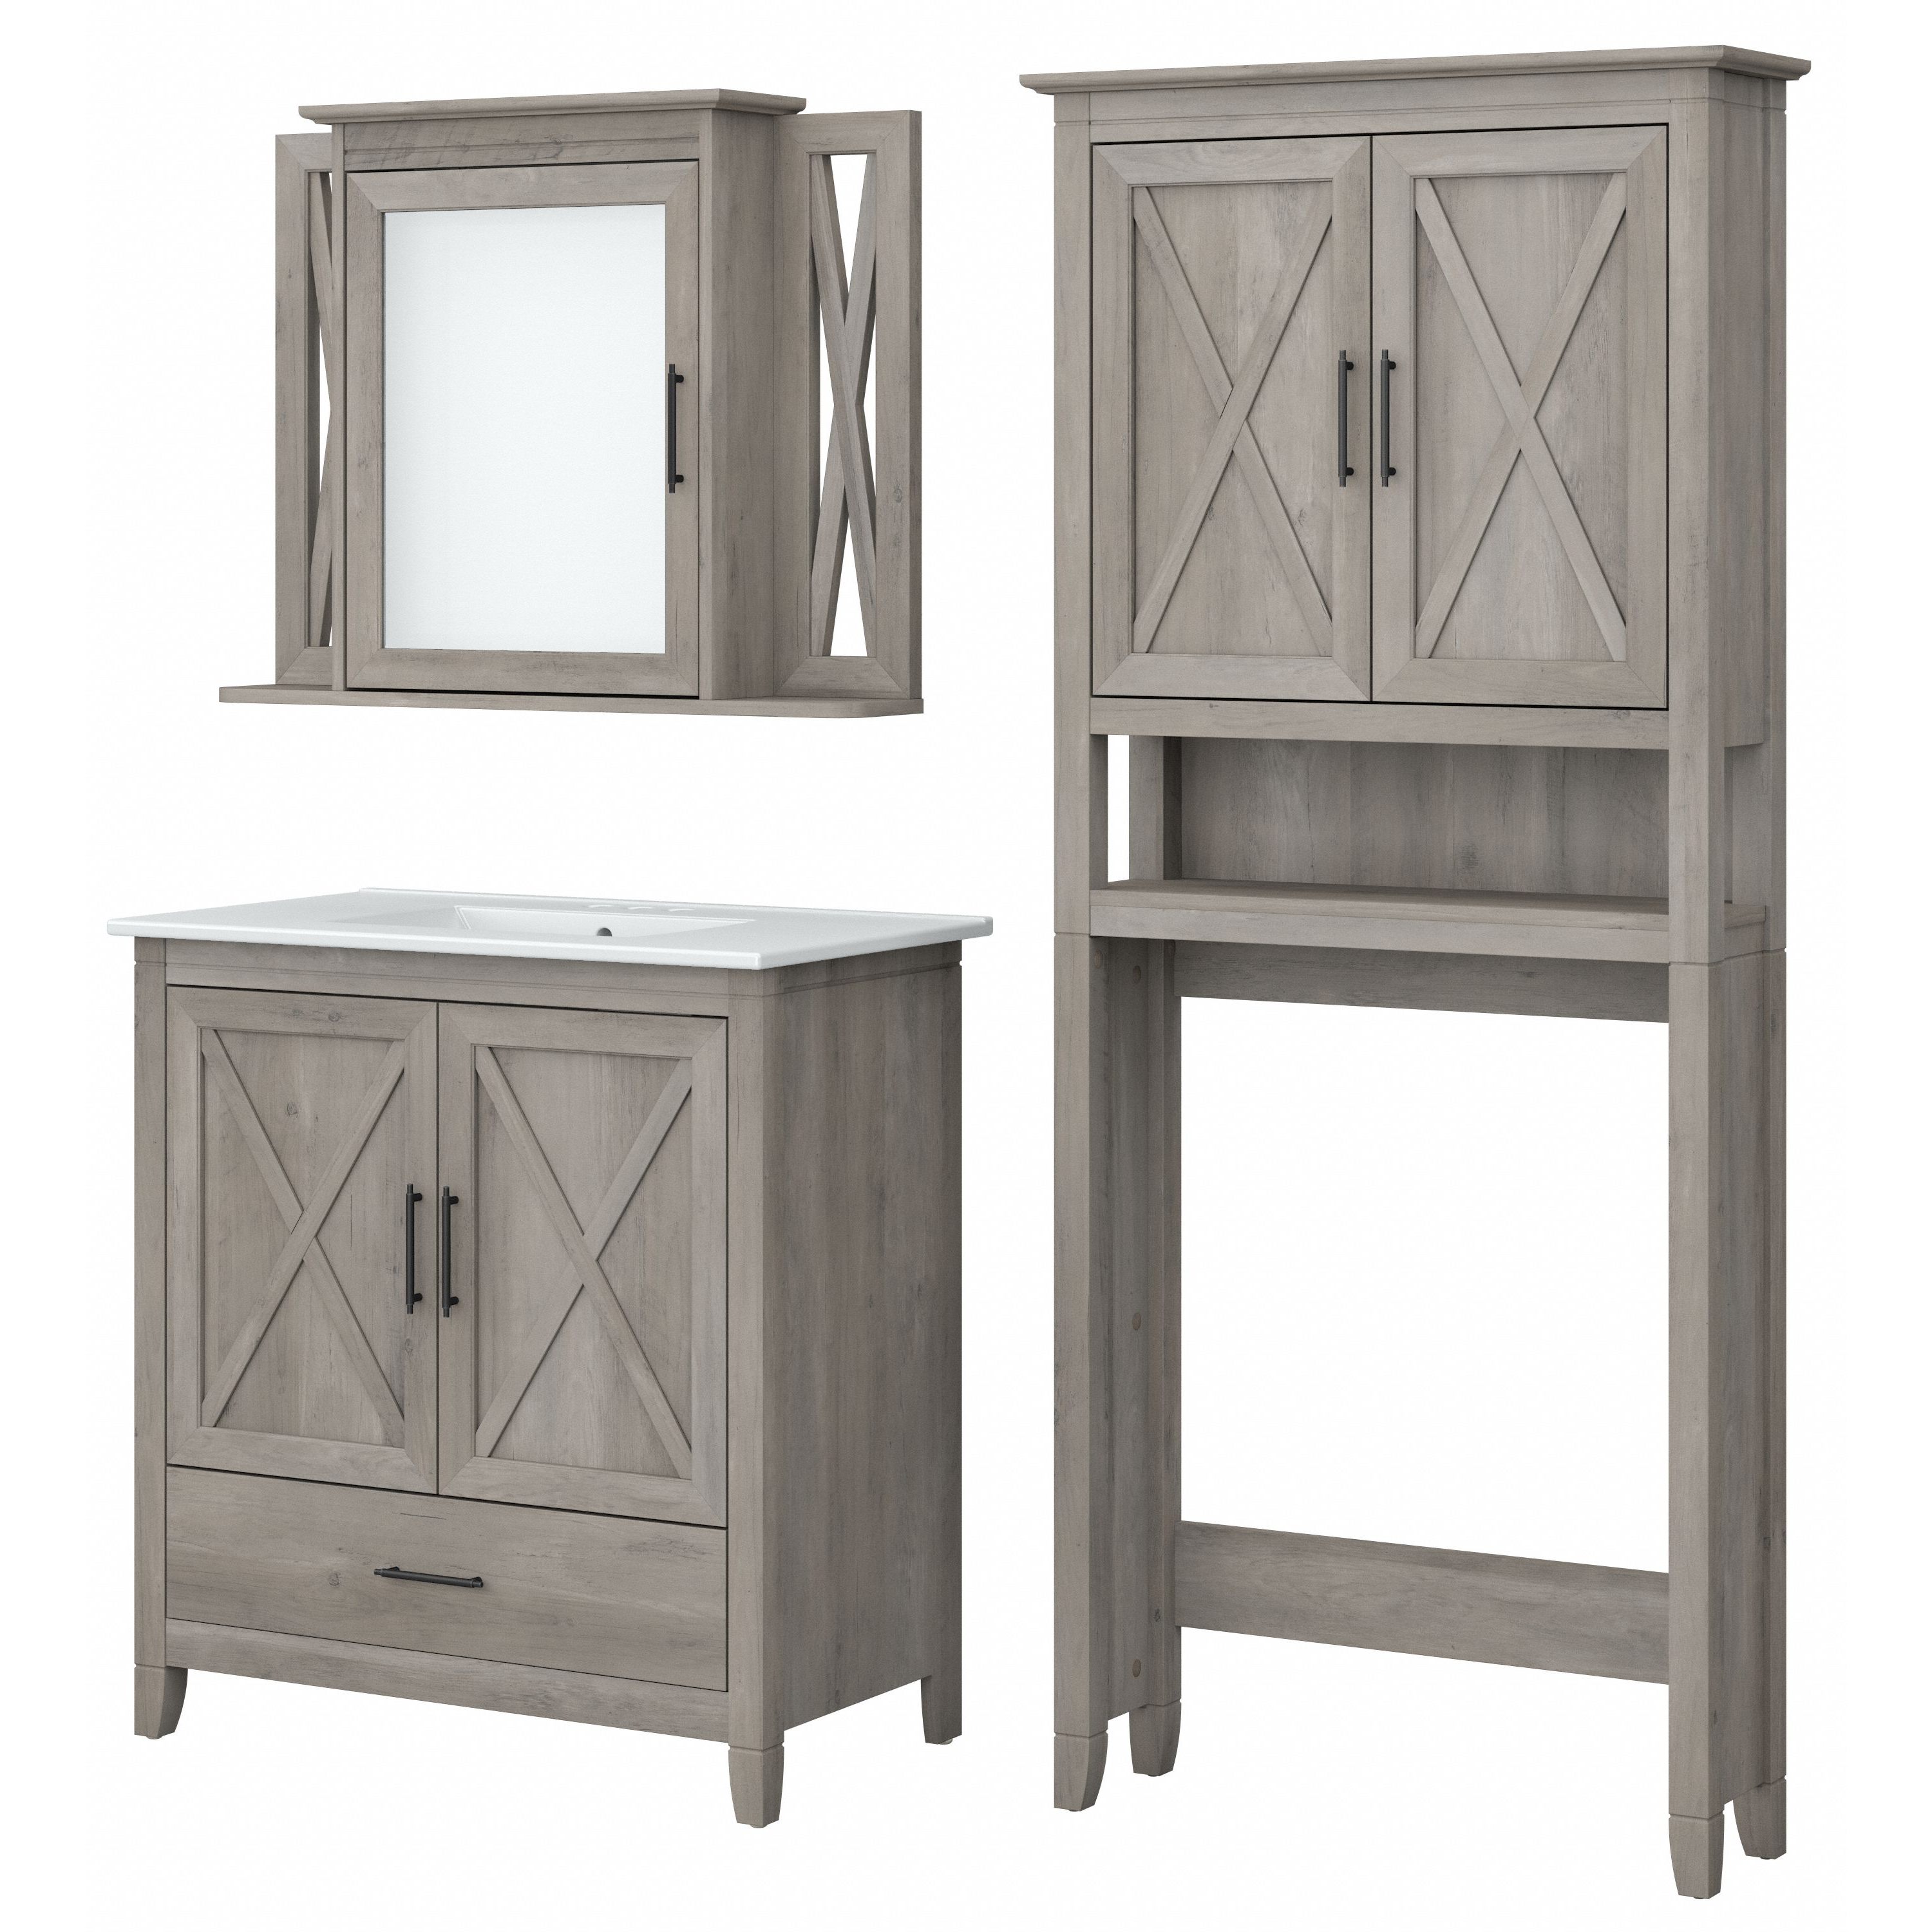 Shop Bush Furniture Key West 32W Bathroom Vanity Sink with Mirror and Over The Toilet Storage Cabinet 02 KWS032DG #color_driftwood gray